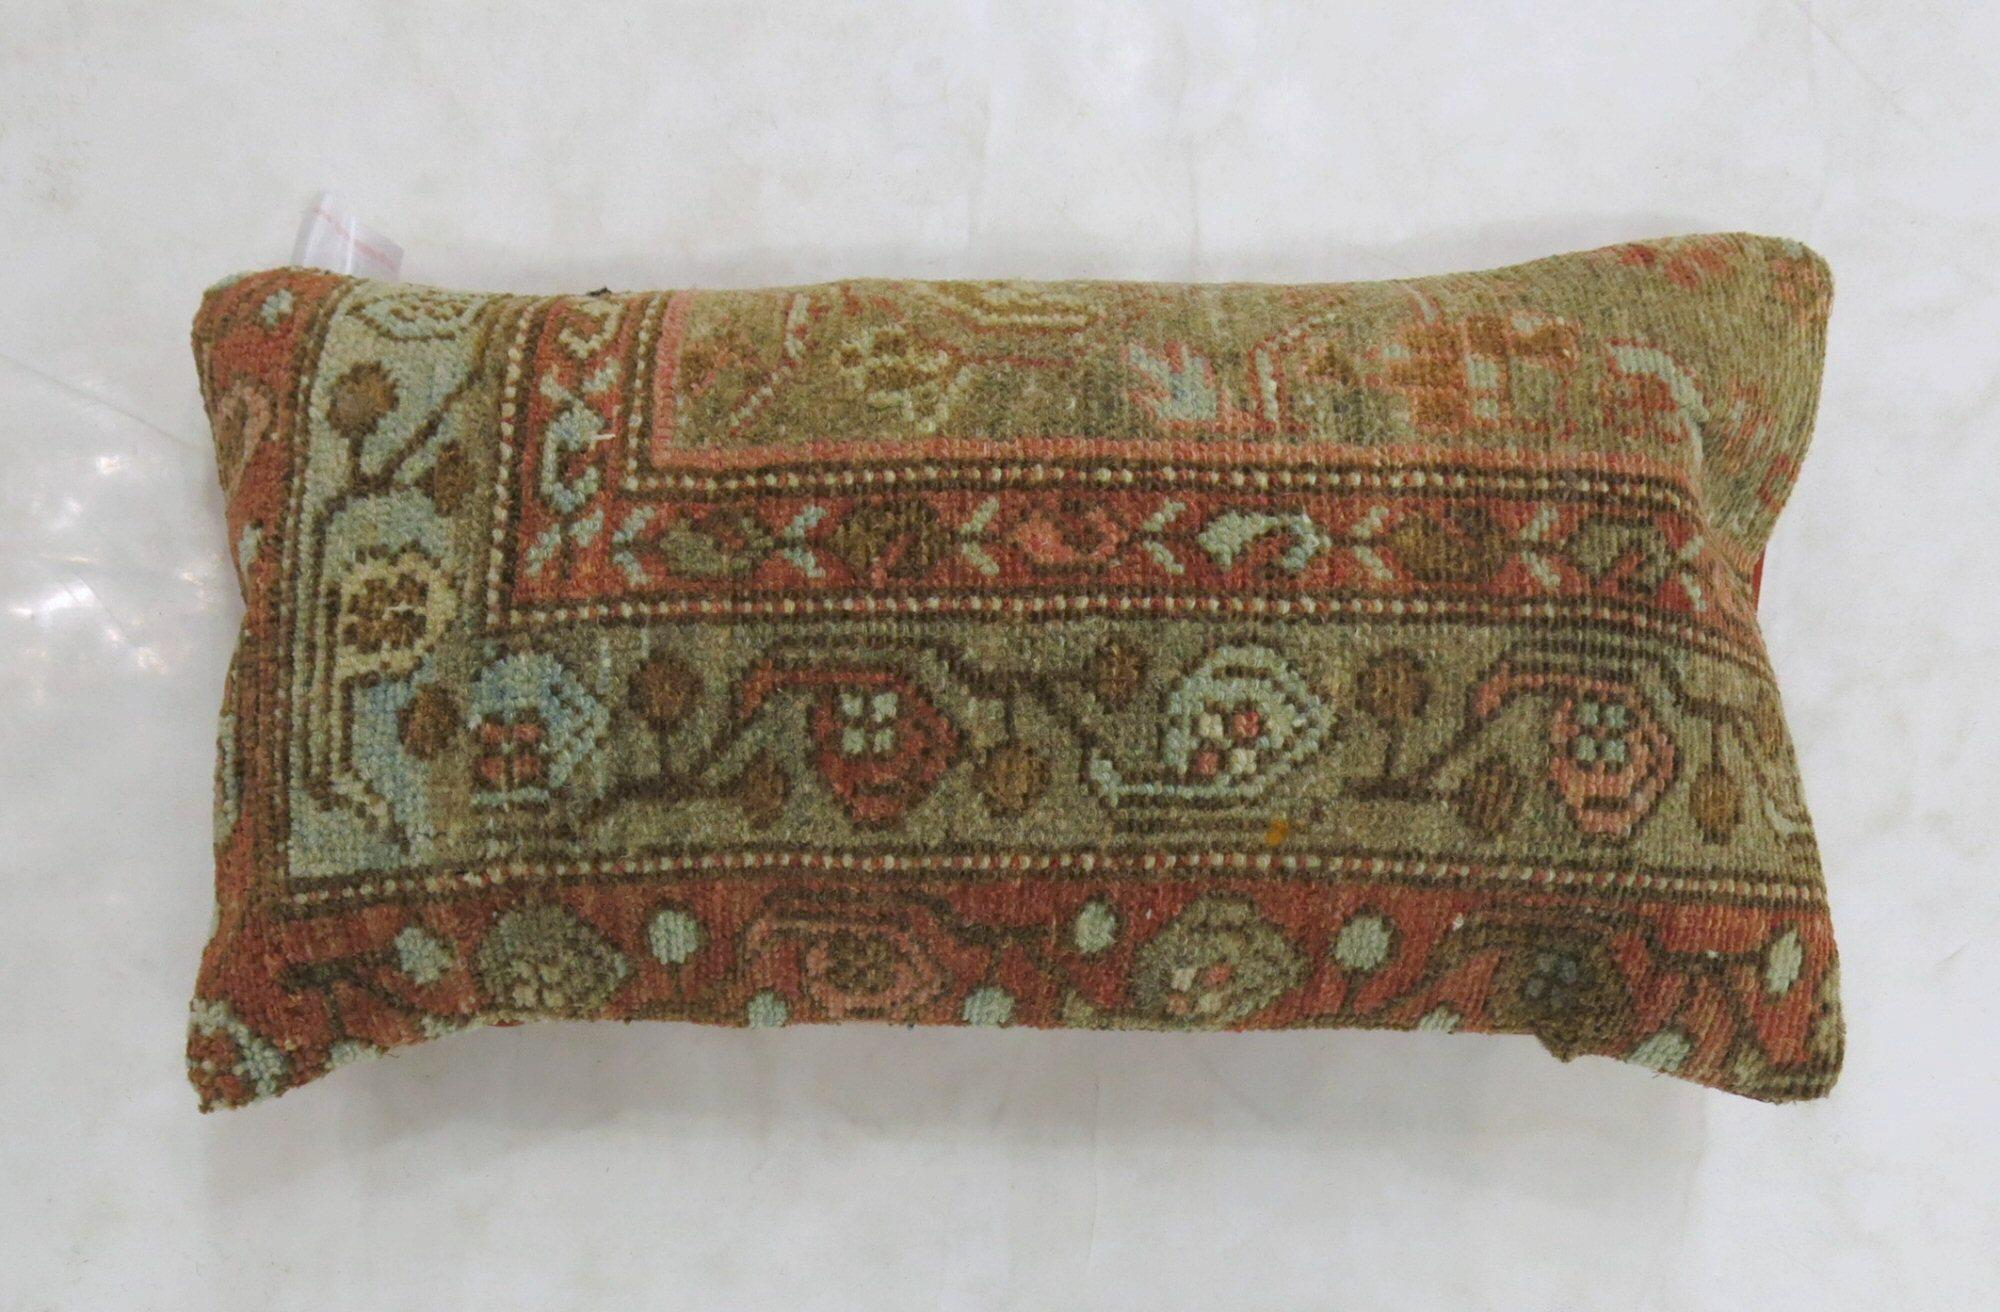 Malayer Persian Bolster Rug Pillow in Caramel Brown Terracotta Accents